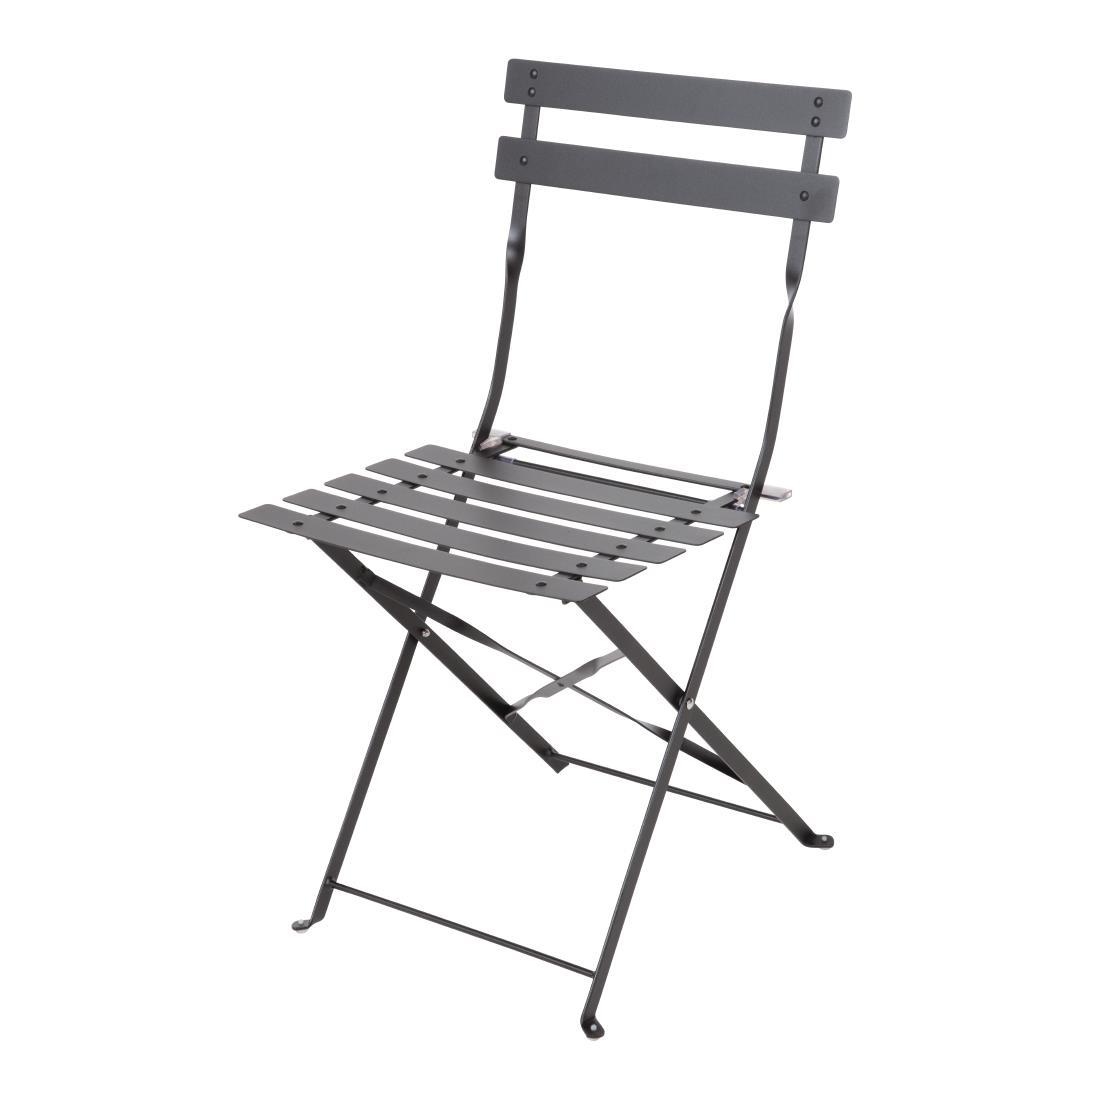 Bolero Black Pavement Style Steel Chairs (Pack of 2) - GH553  - 3